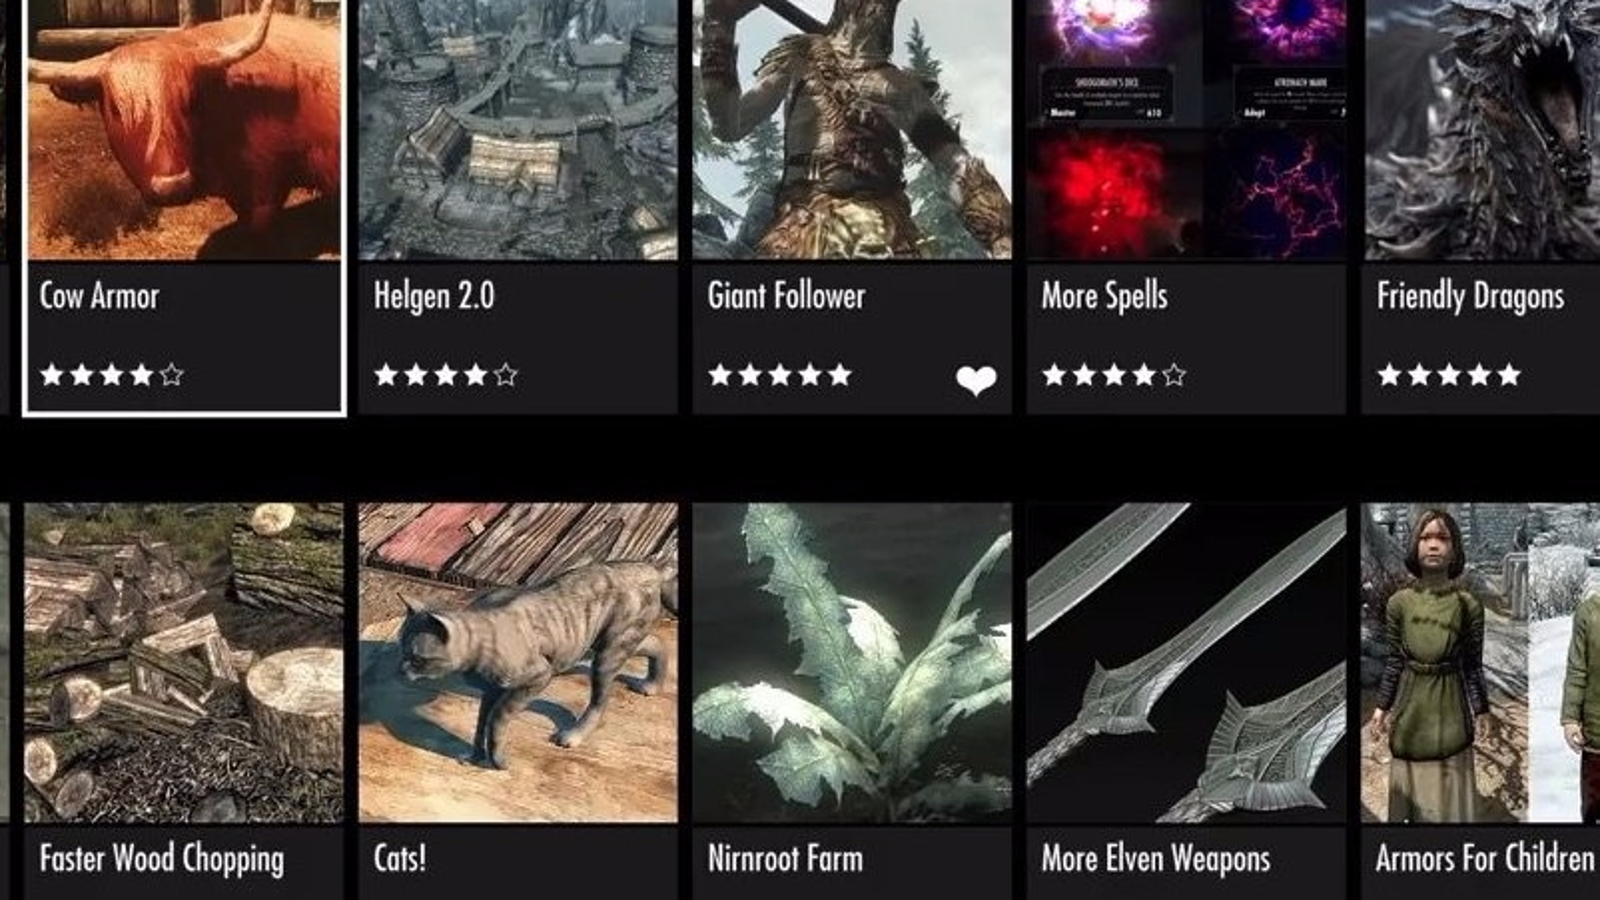 Skyrim mods on PS4, Xbox PC - How to mods in the Special Edition release | Eurogamer.net